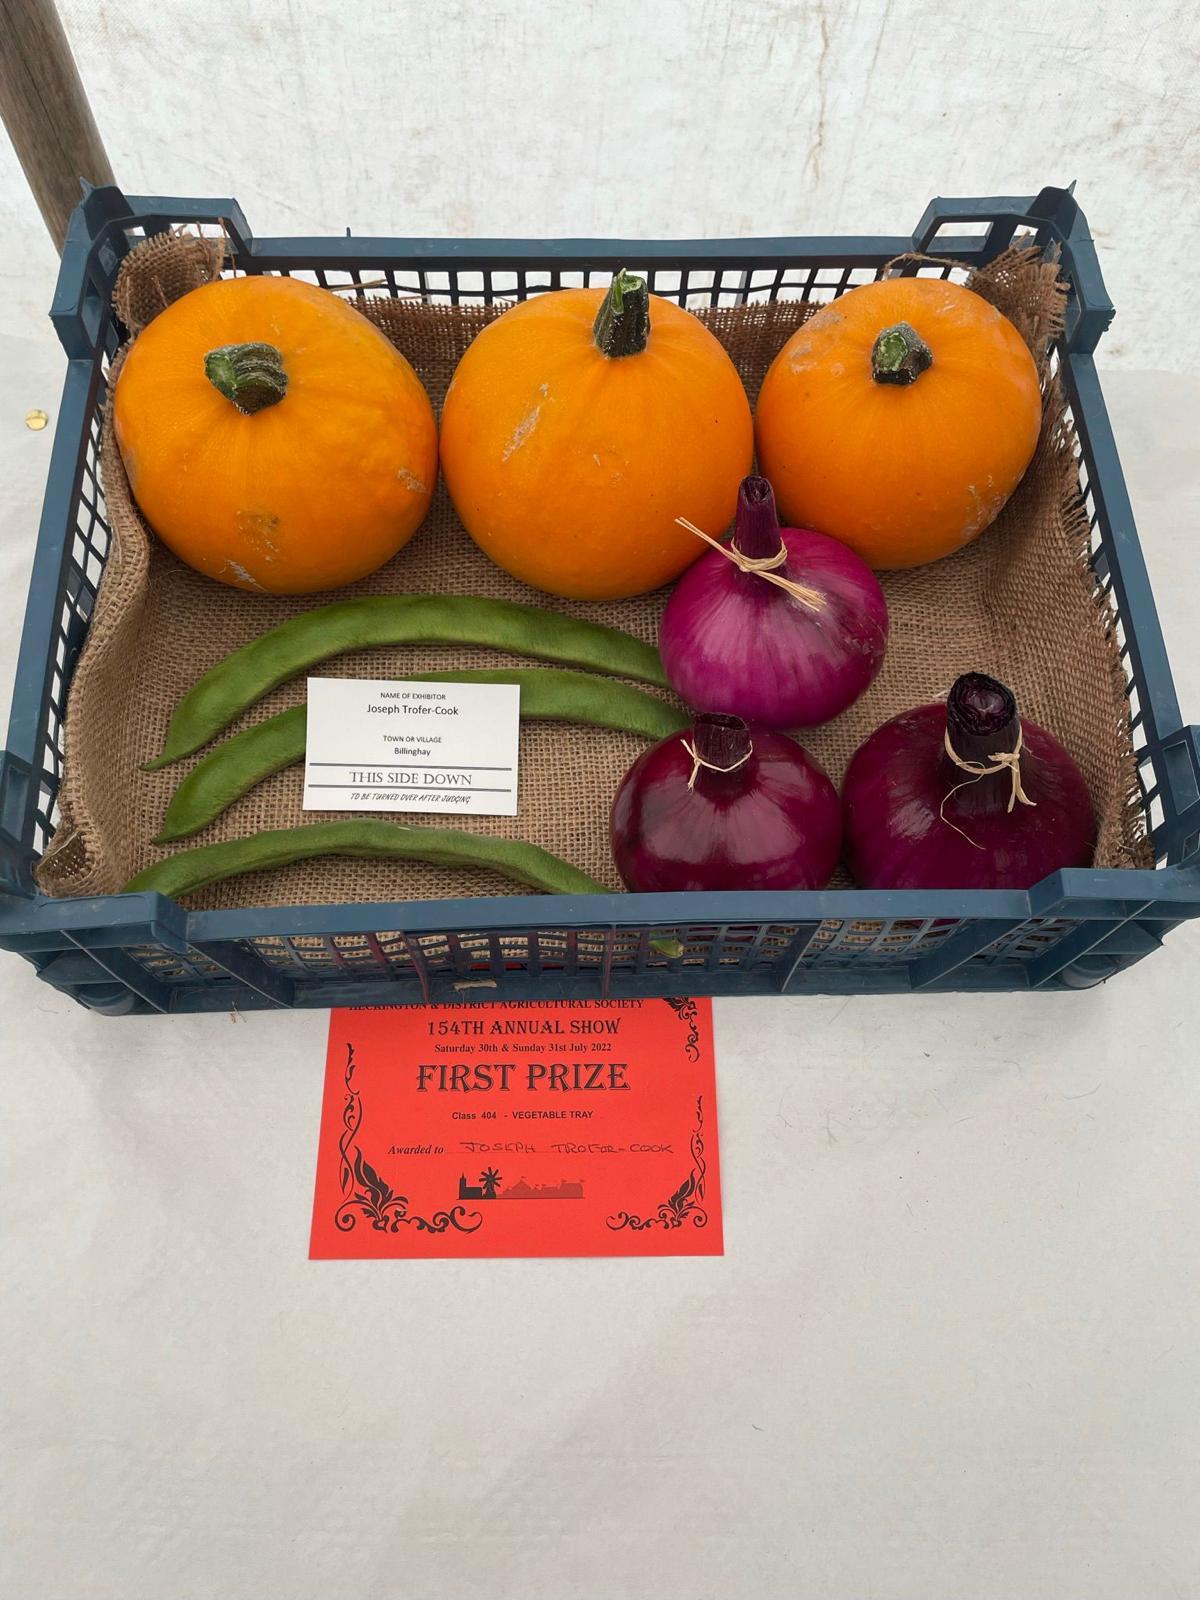 Joe's Veg won the top prize in an agricultural society. (SWNS)